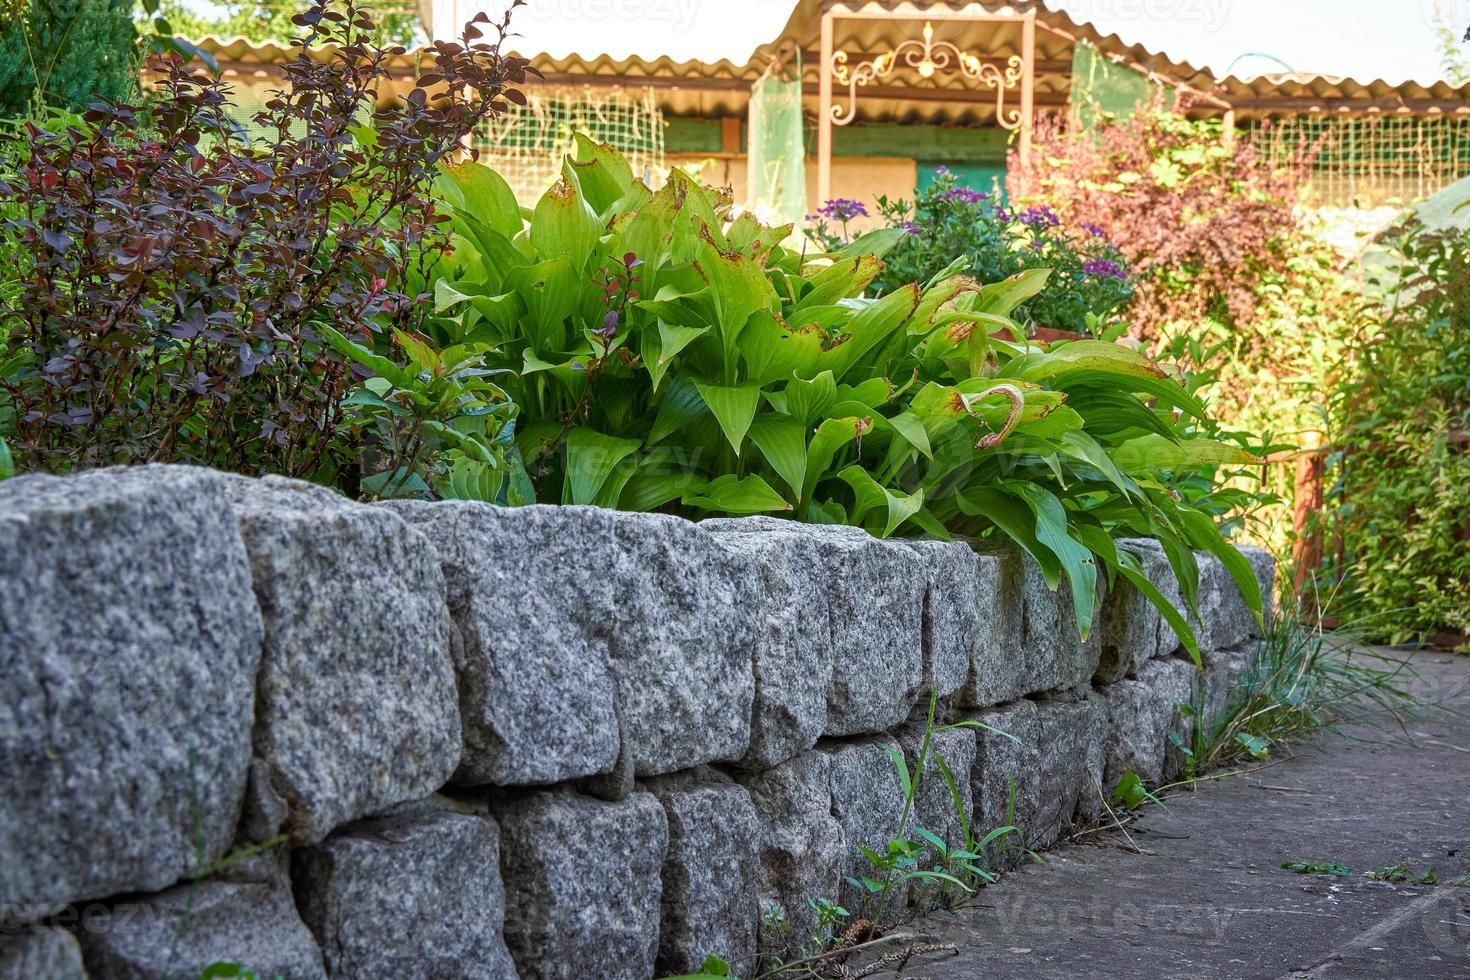 Concrete blocks for a retaining wall